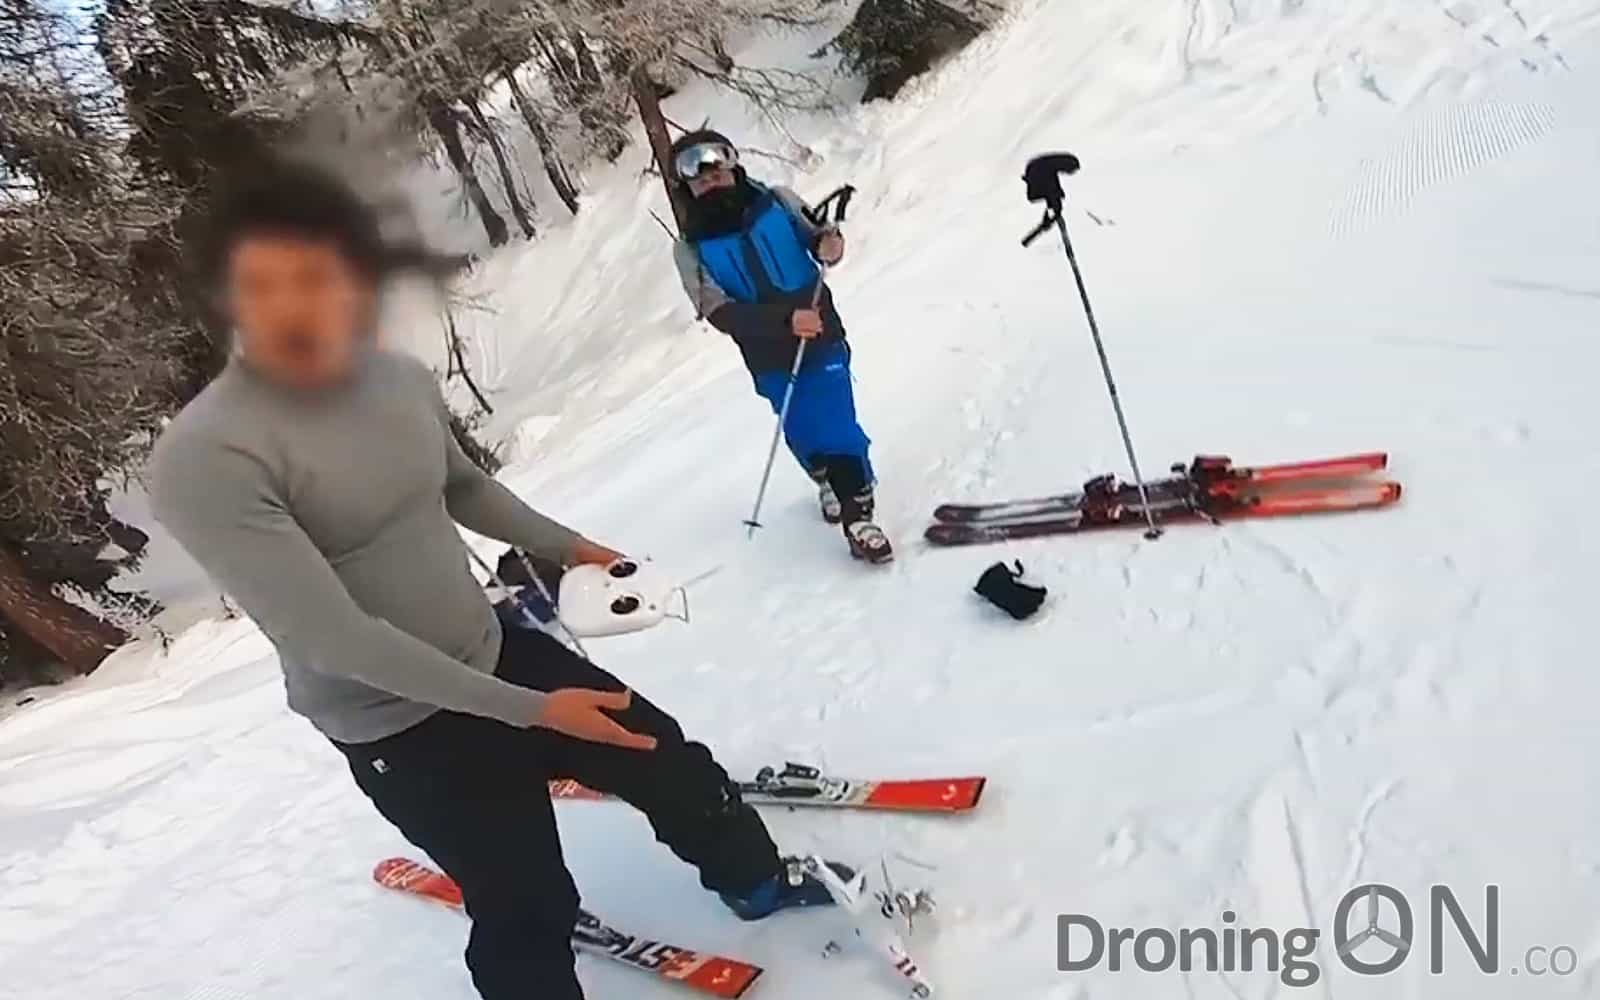 Two drone operators have been assaulted and their drone destroyed by a skier at the Les Arcs ski resort